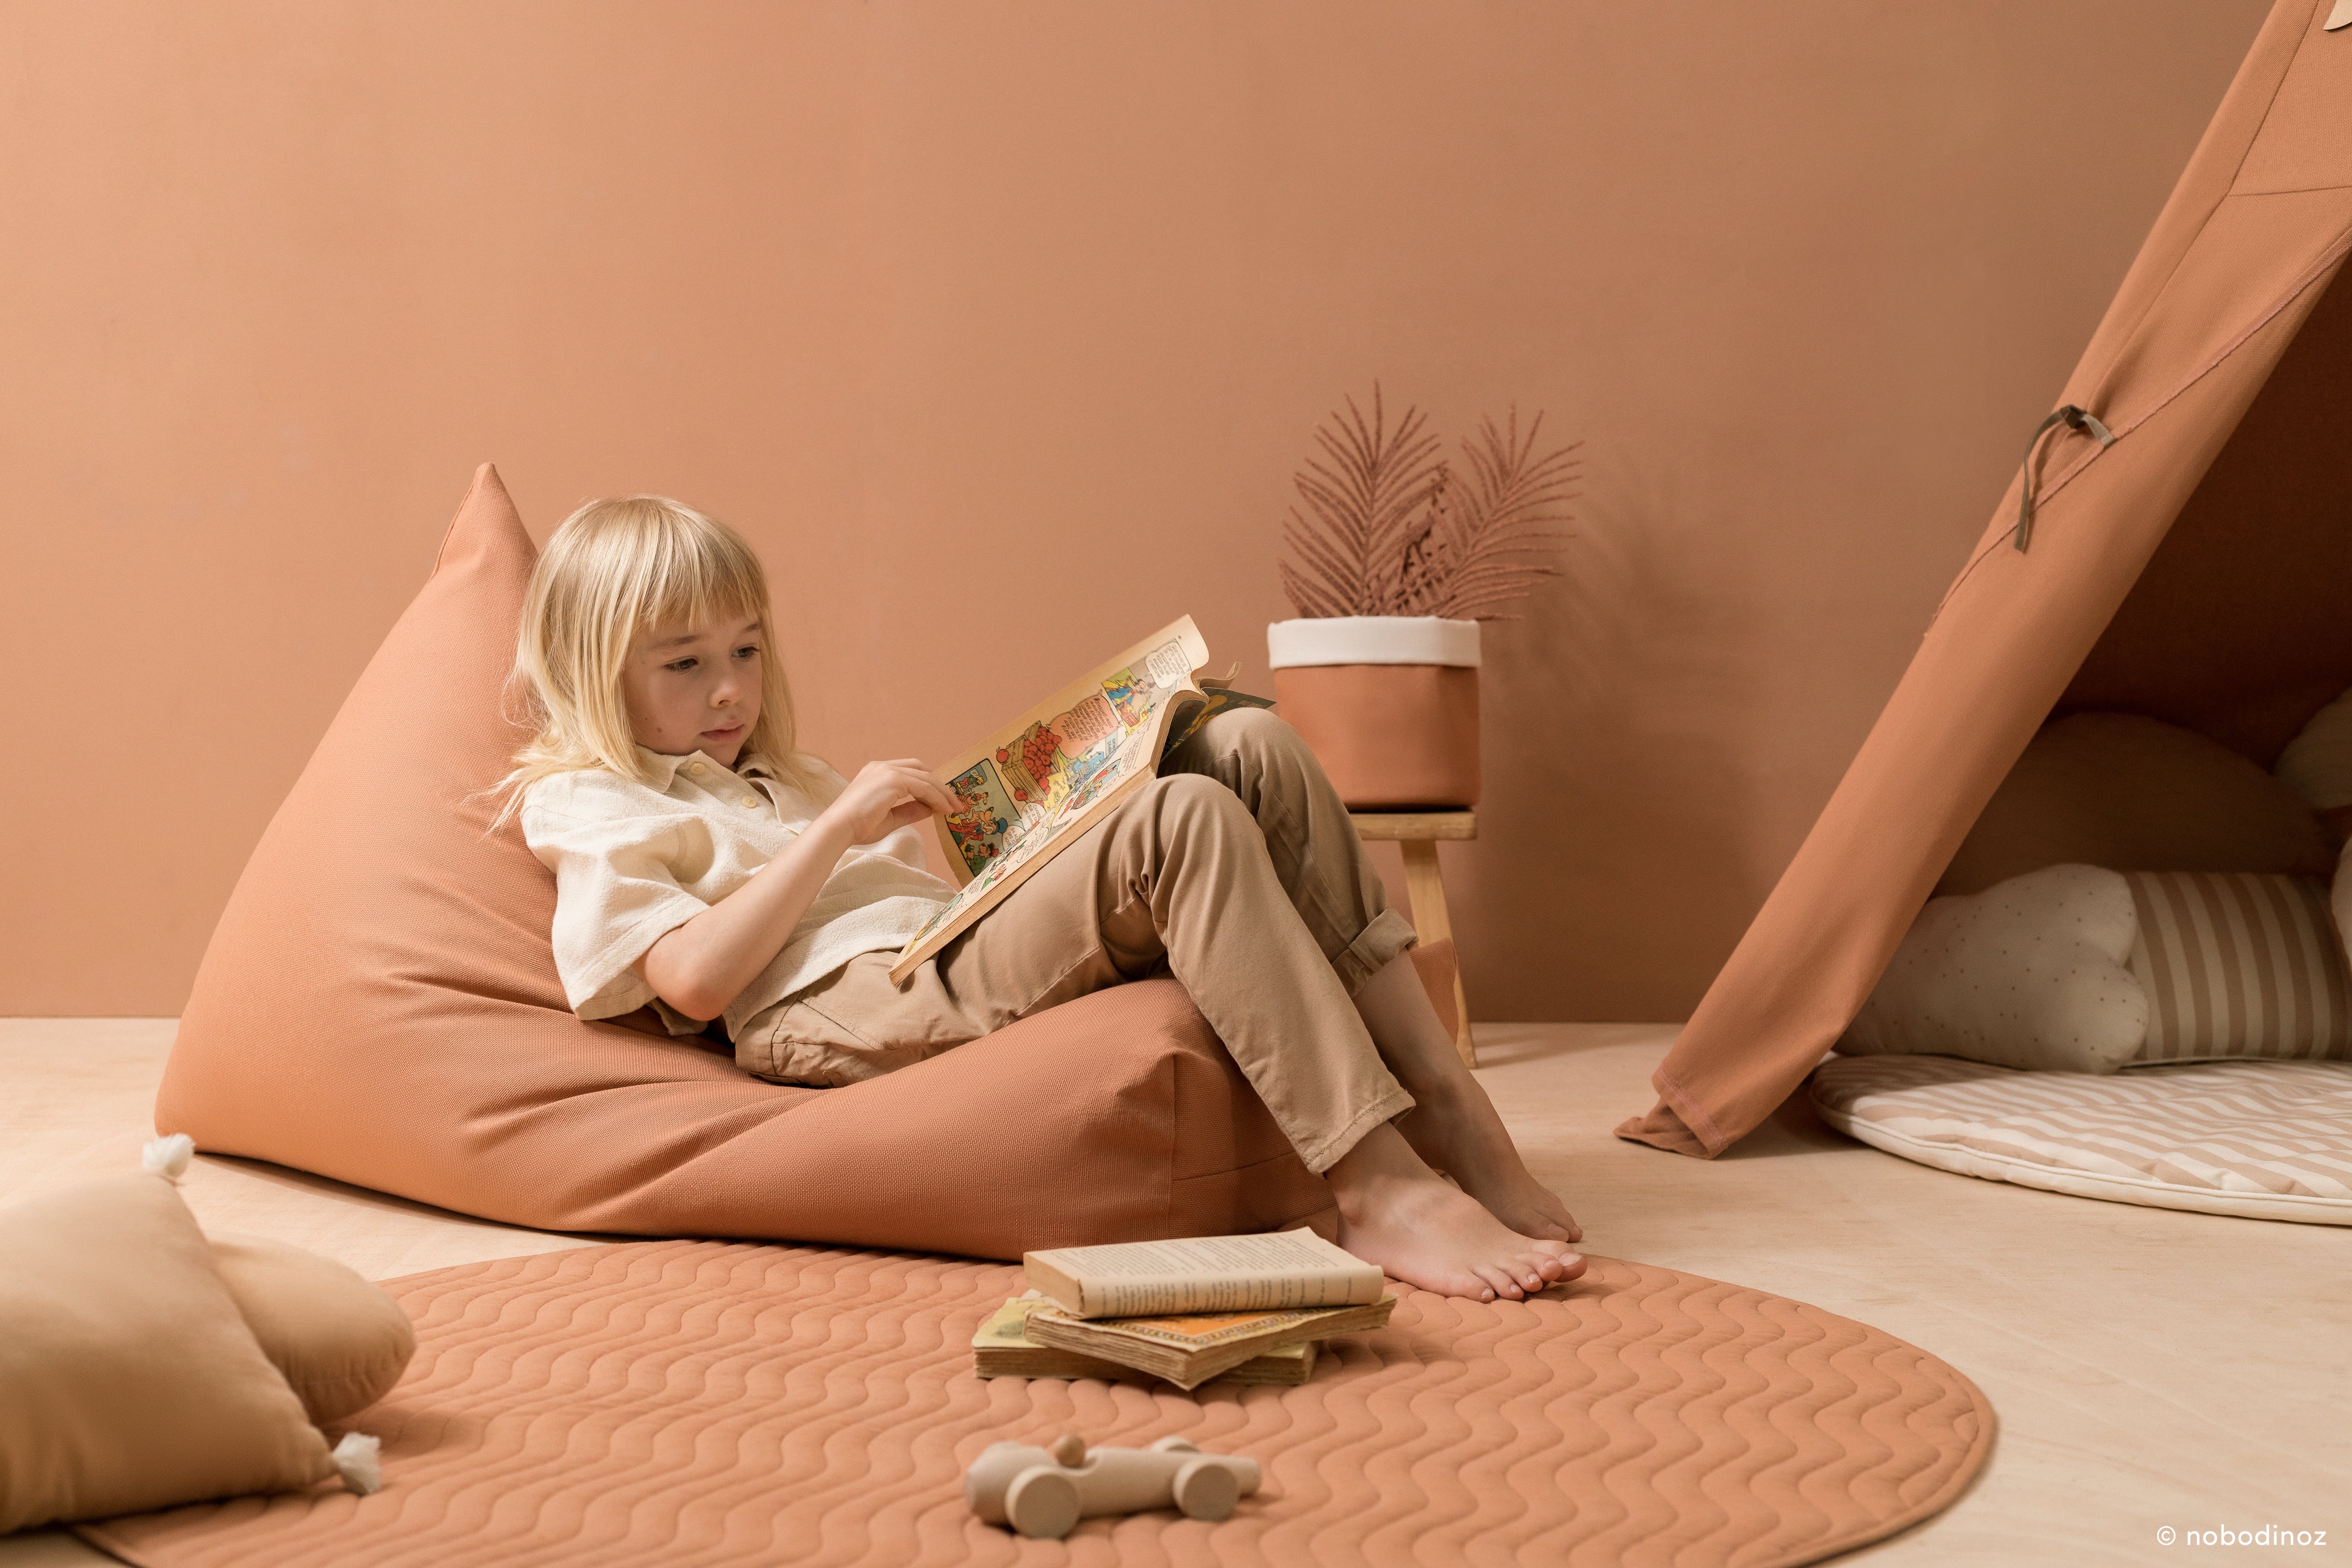 Nobodinoz Singapore, Deer Industries Kids Decor Accessories, Kids Decor Singapore, Kids Bean Bags Singapore, Kids Poufs Singapore, Children Bean Bag with removable covers, washable cover bean bag, Sienna Brown Oasis Bean Bag